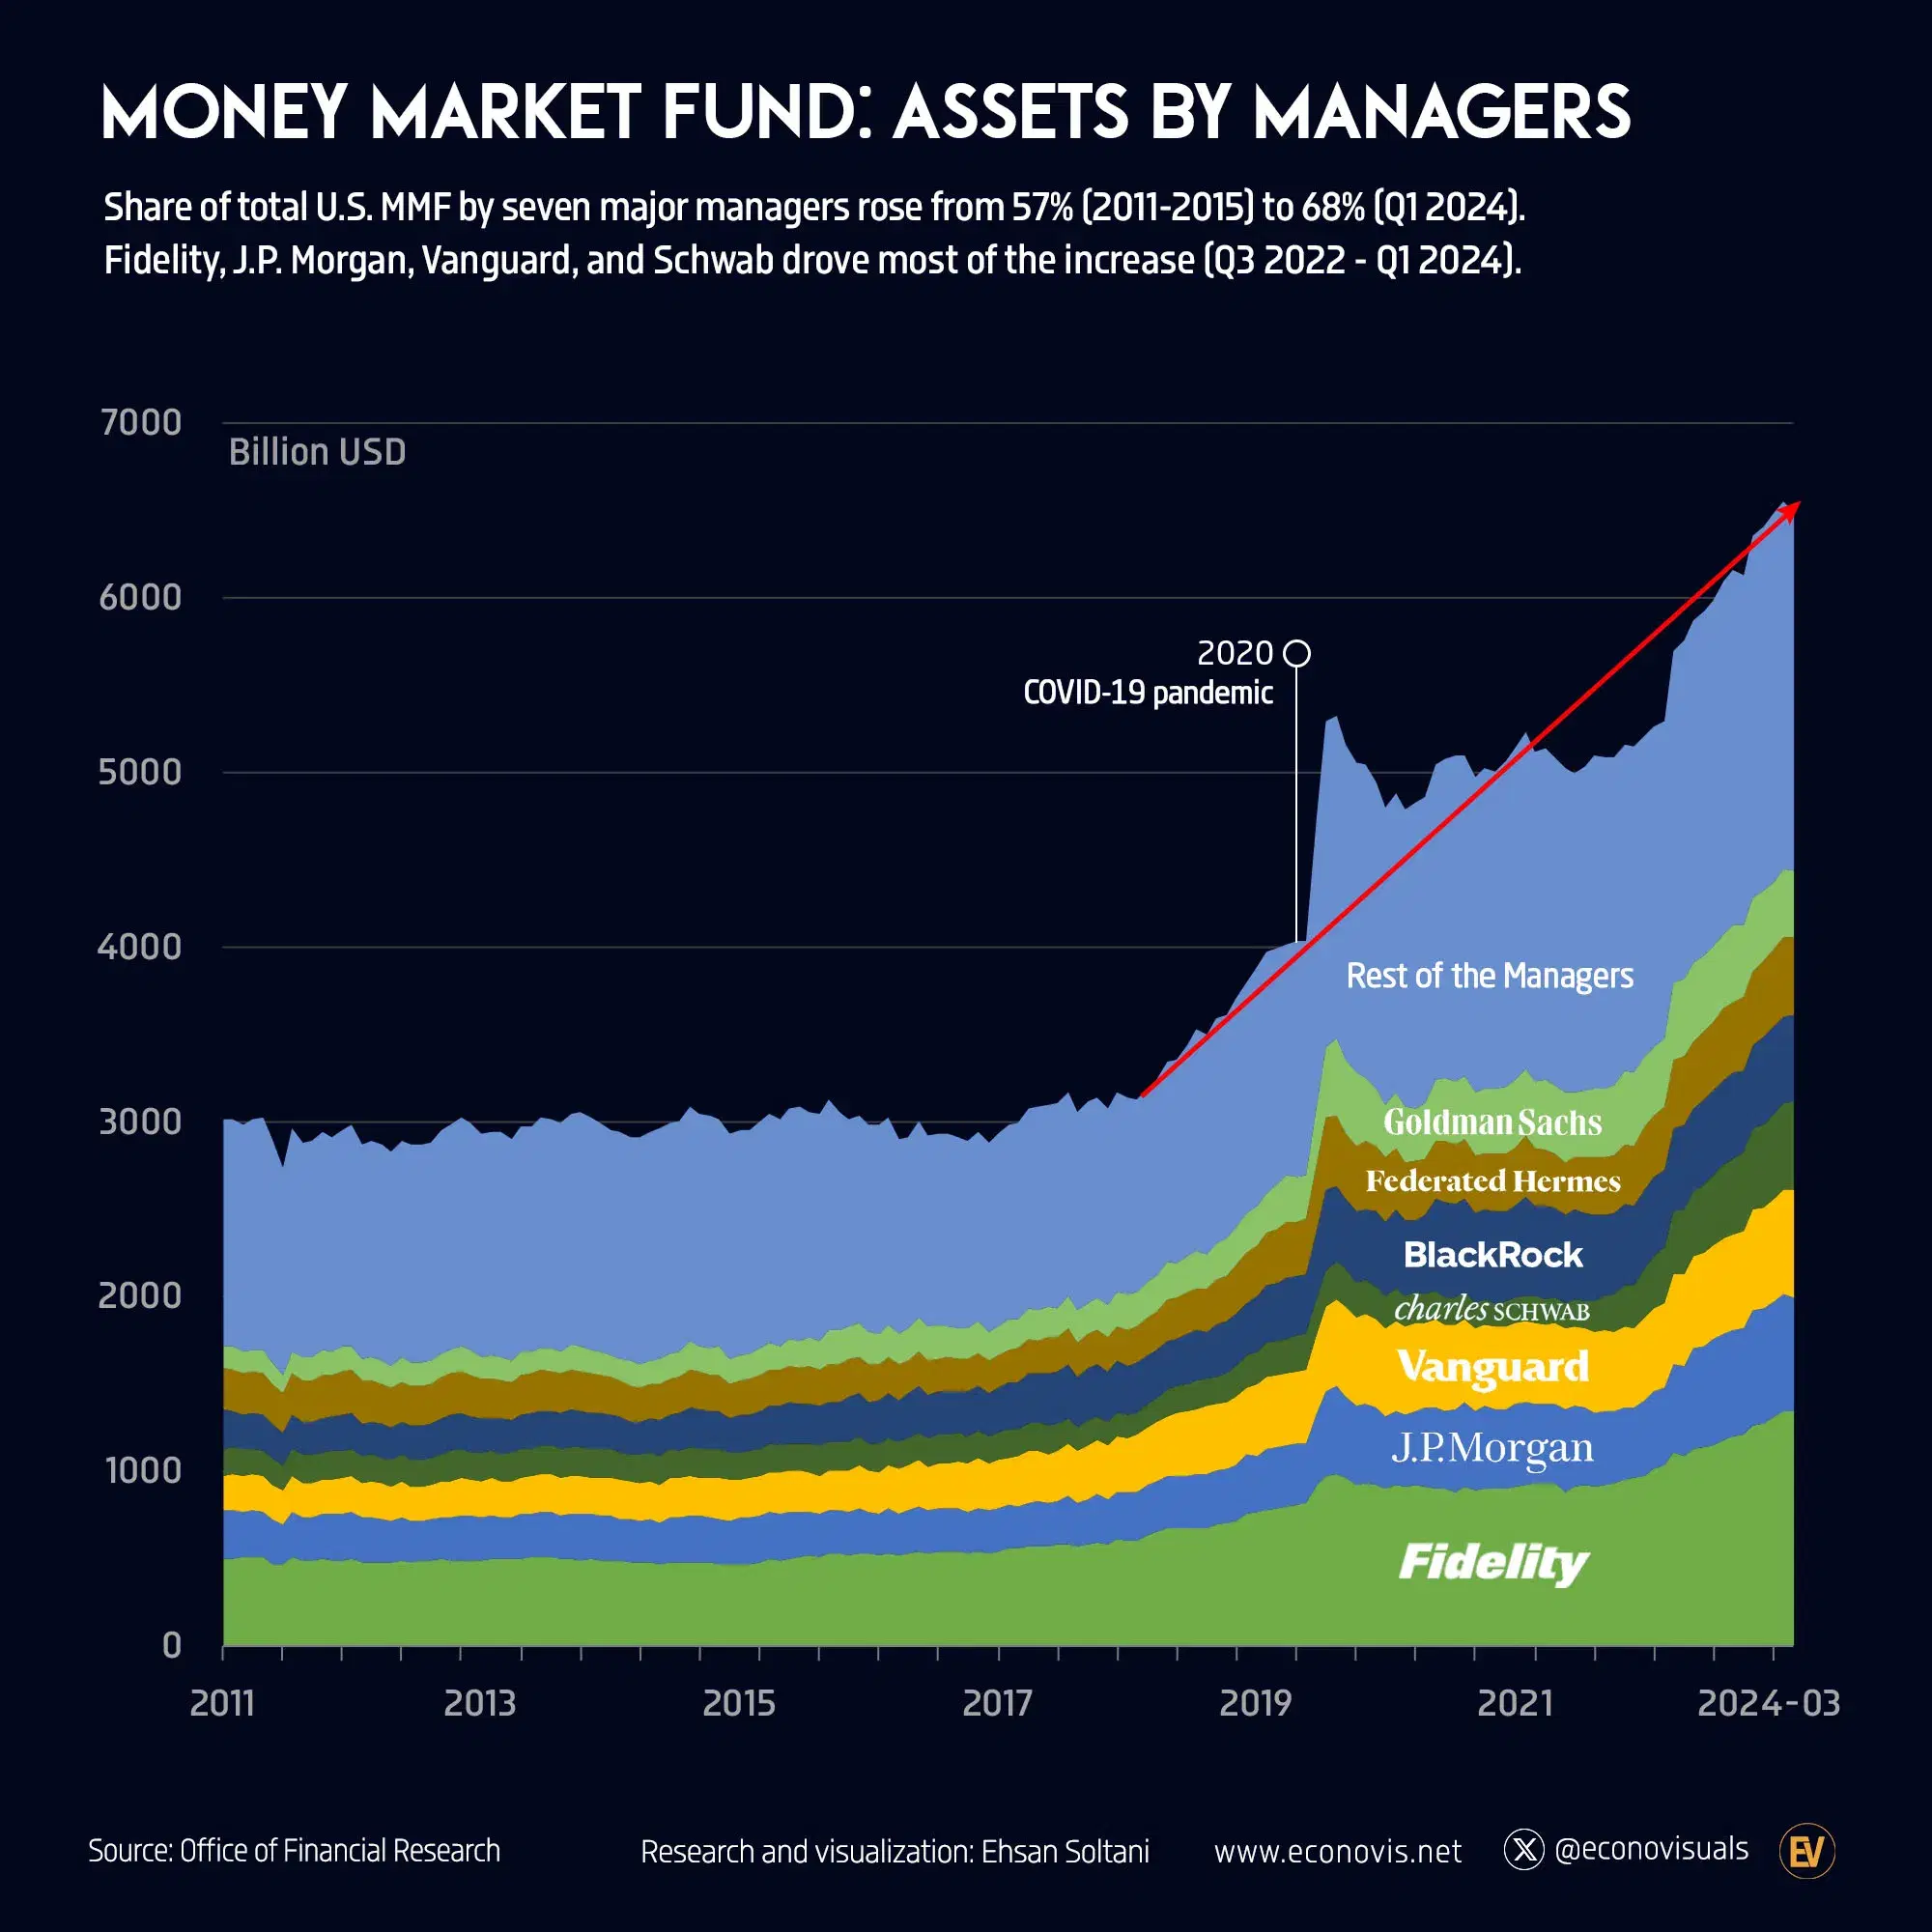 U.S. Money Market Fund: Assets by Managers